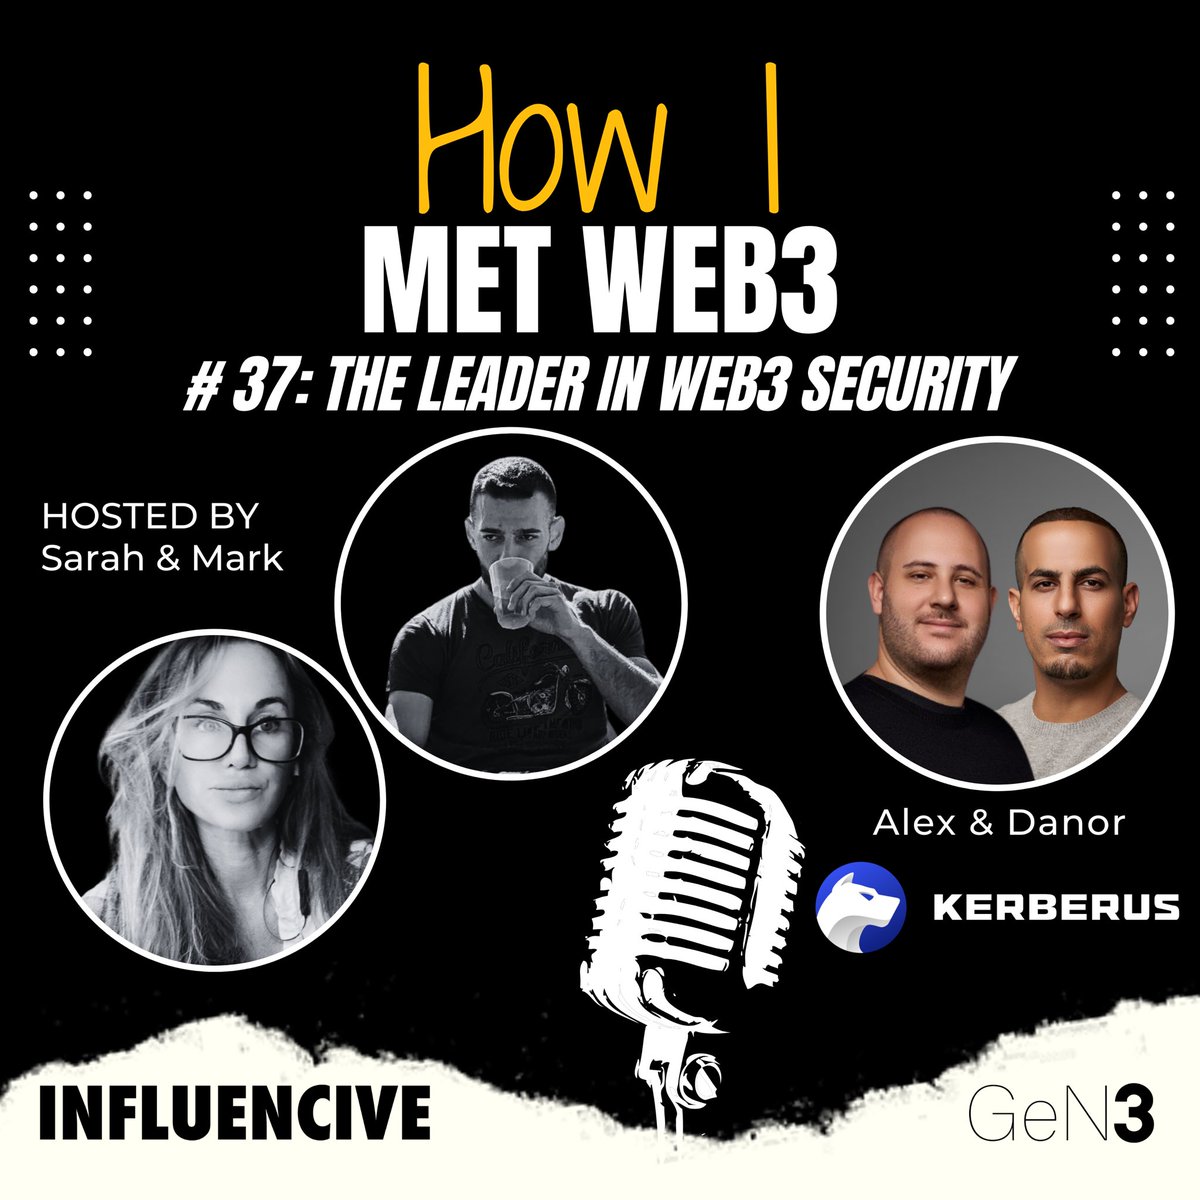 🎙️#37: The Leader in Web3 Security @block_editor & @mhl_eth interview @An7i21 and @metrokatz to discuss the rebrand of Mint Defense to @Kerberus, their product updates, security features, and more. Do you use protection? Listen/subscribe: open.spotify.com/episode/3jCkvS…